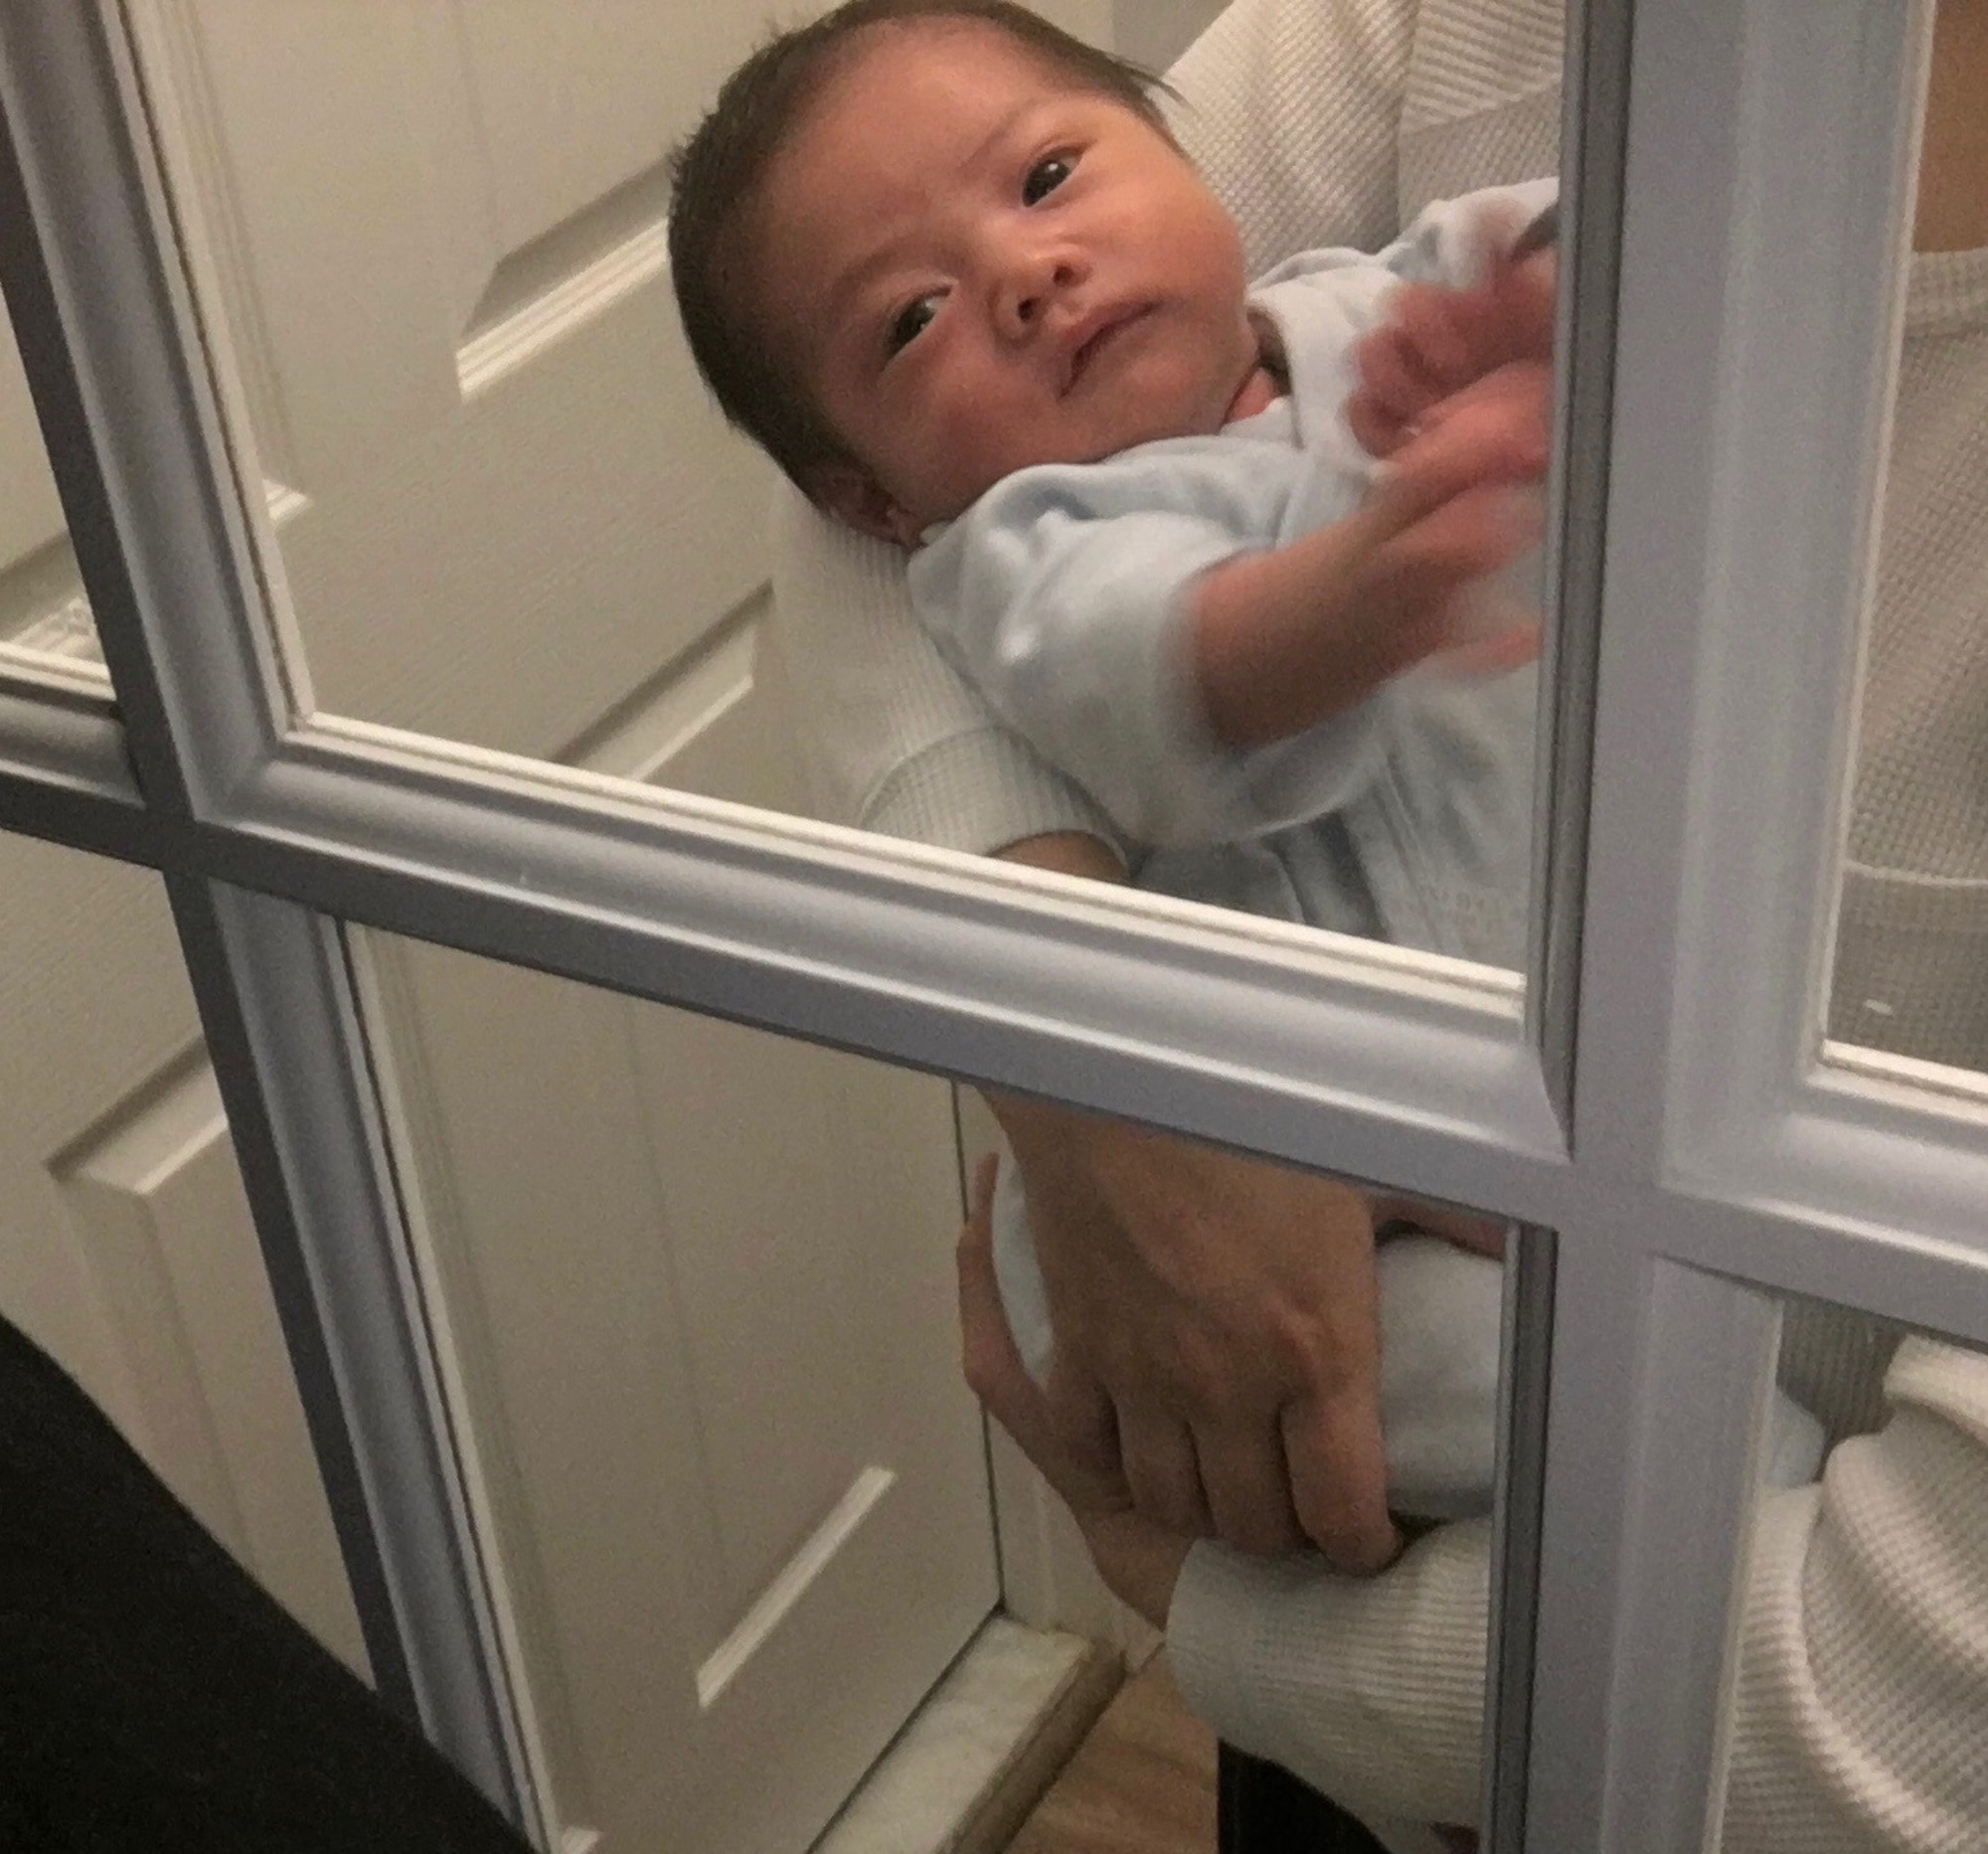 Sean Alejandro looks through a glass pane to his father, Master Sgt. Matthew Alejandro, 844th Communication Squadron executive team member, who was quarantined during Sean's birth. (U.S. Air Force photo/Master Sgt. Matthew Alejandro)